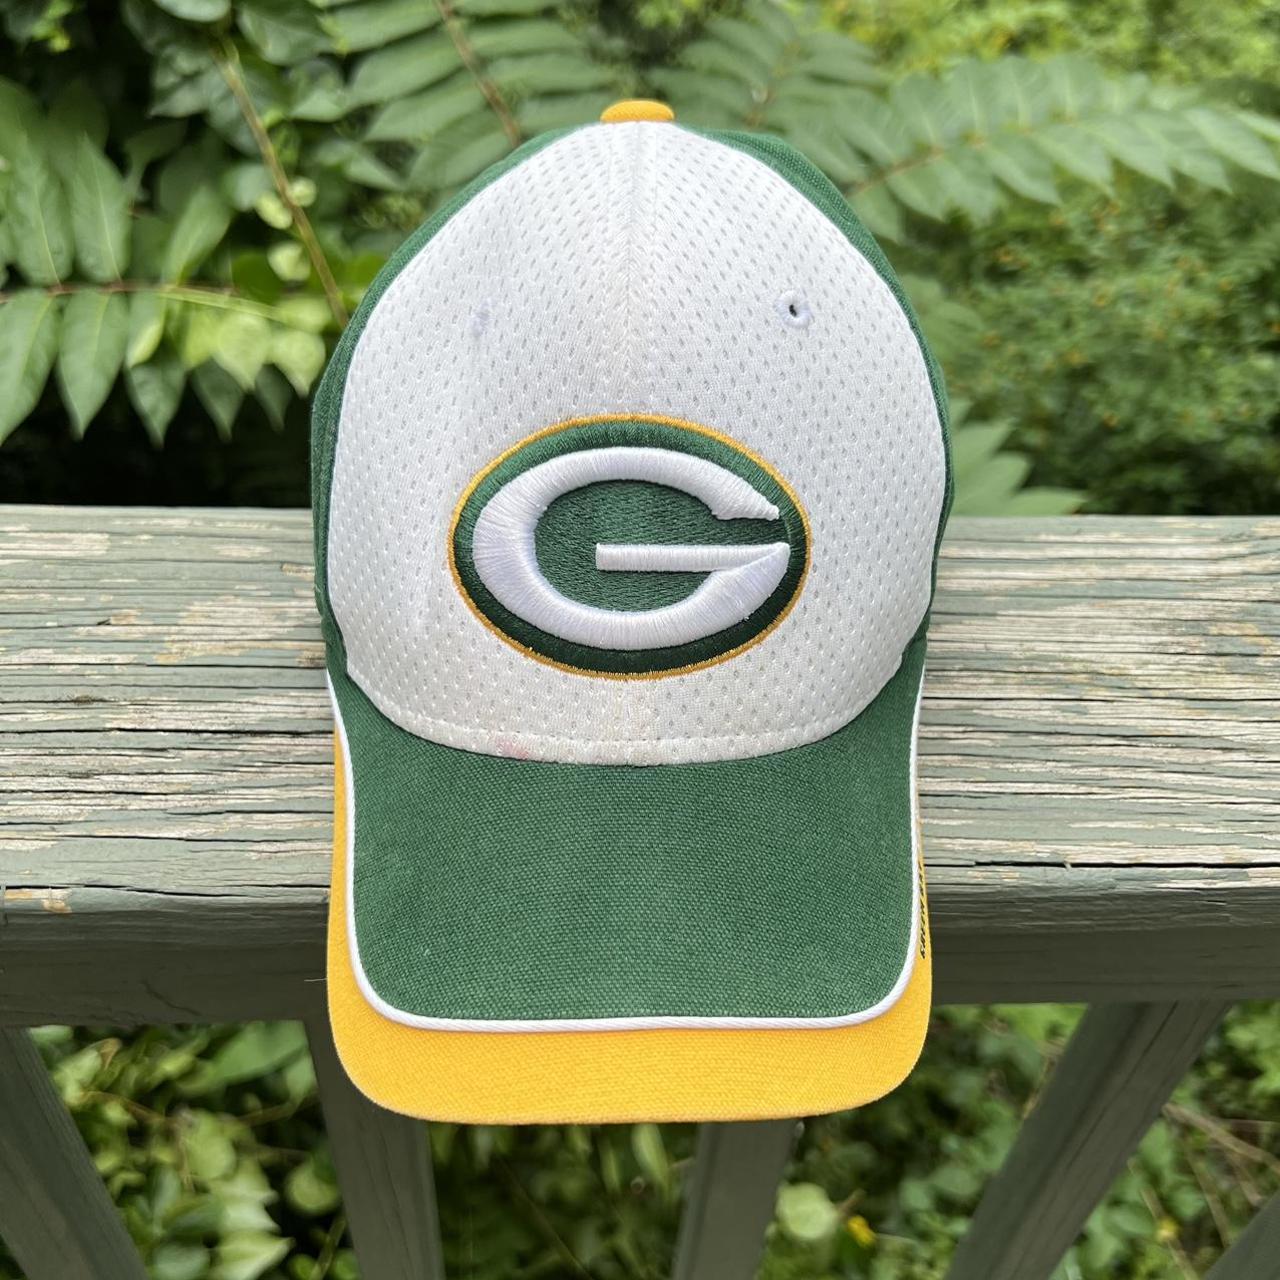 vintage green bay packers hat